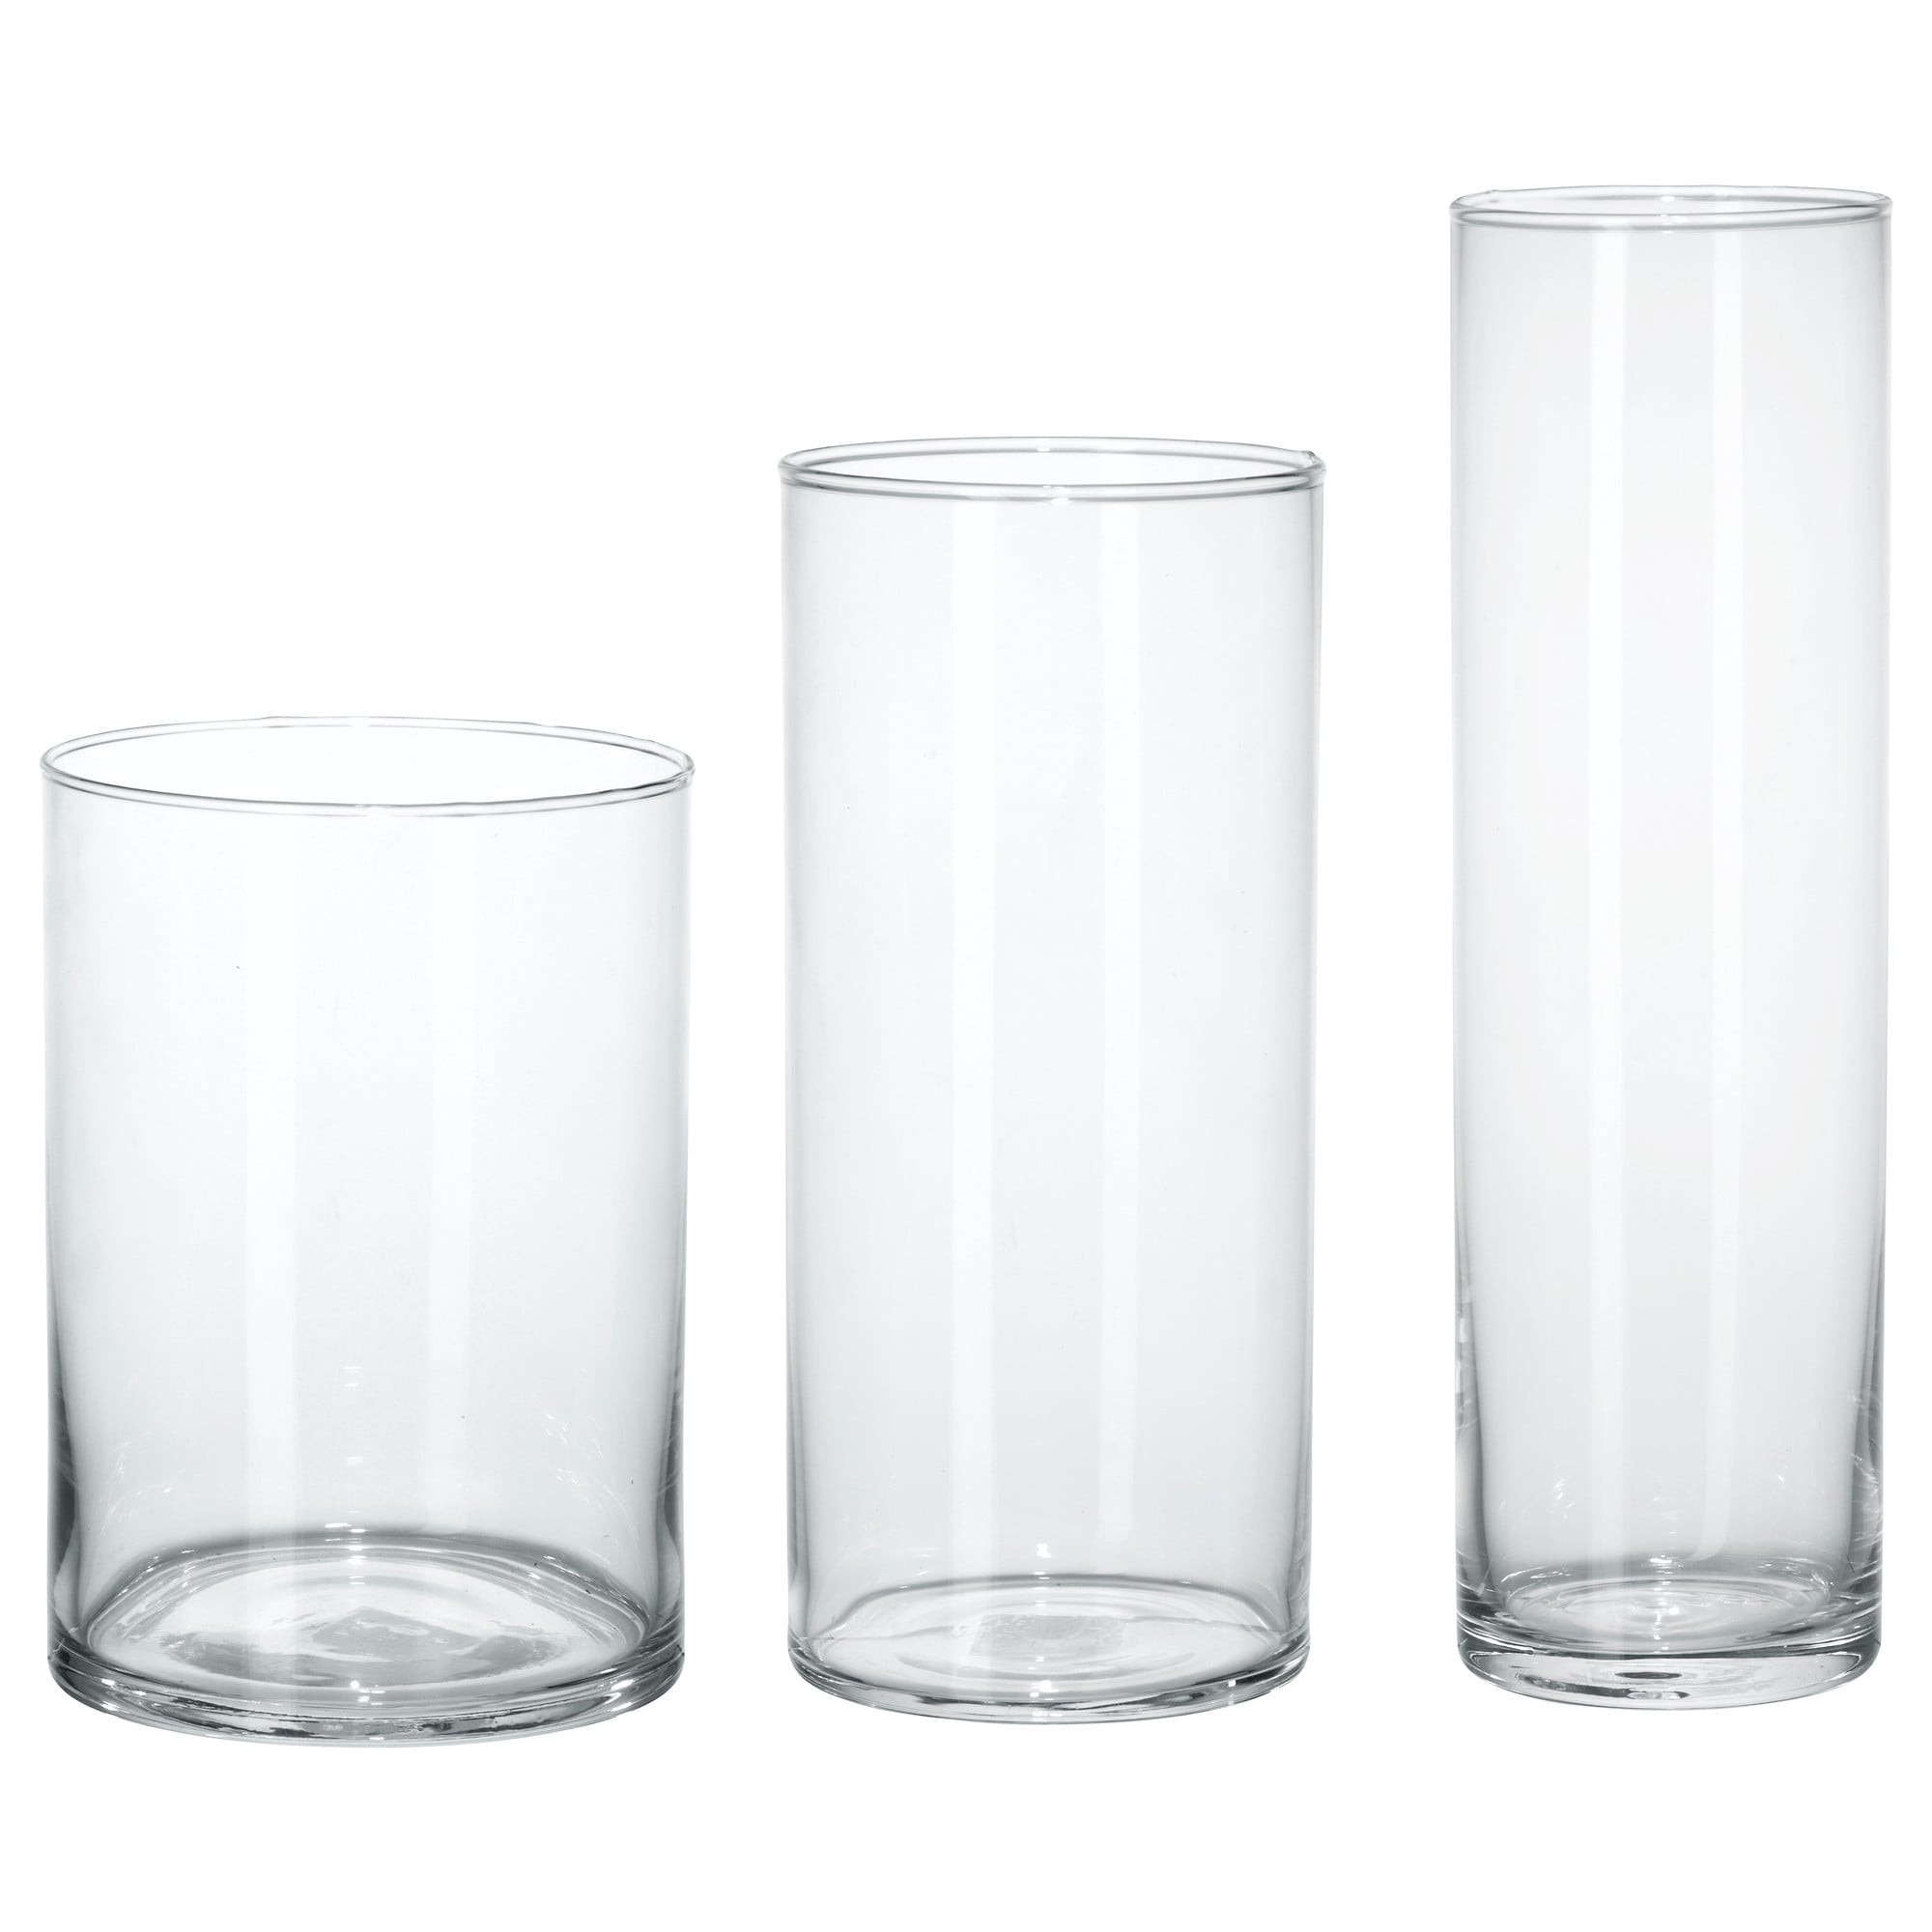 20 Amazing Large Glass Flower Vase 2024 free download large glass flower vase of cylinder vase set of 3 ikea throughout english franac2a7ais